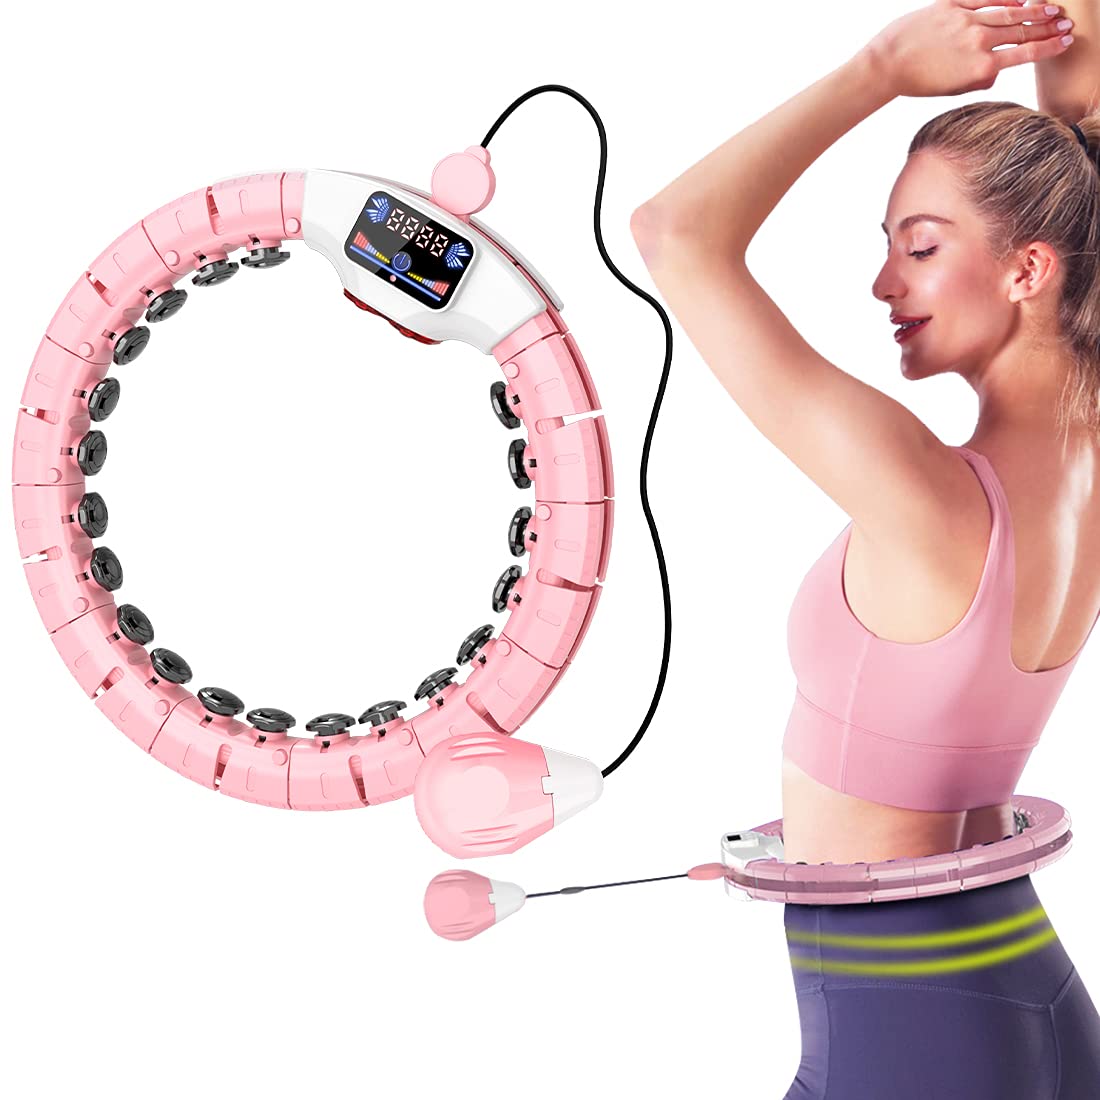 Wholesale China Trampline Net Companies –  Hula Hoop Weighted Hoola Hoops Smart Hula Hoop, LED Counter 25 Detachable Knots Exercise Fitness Hoop for Weight Loss  – Yiwu Real